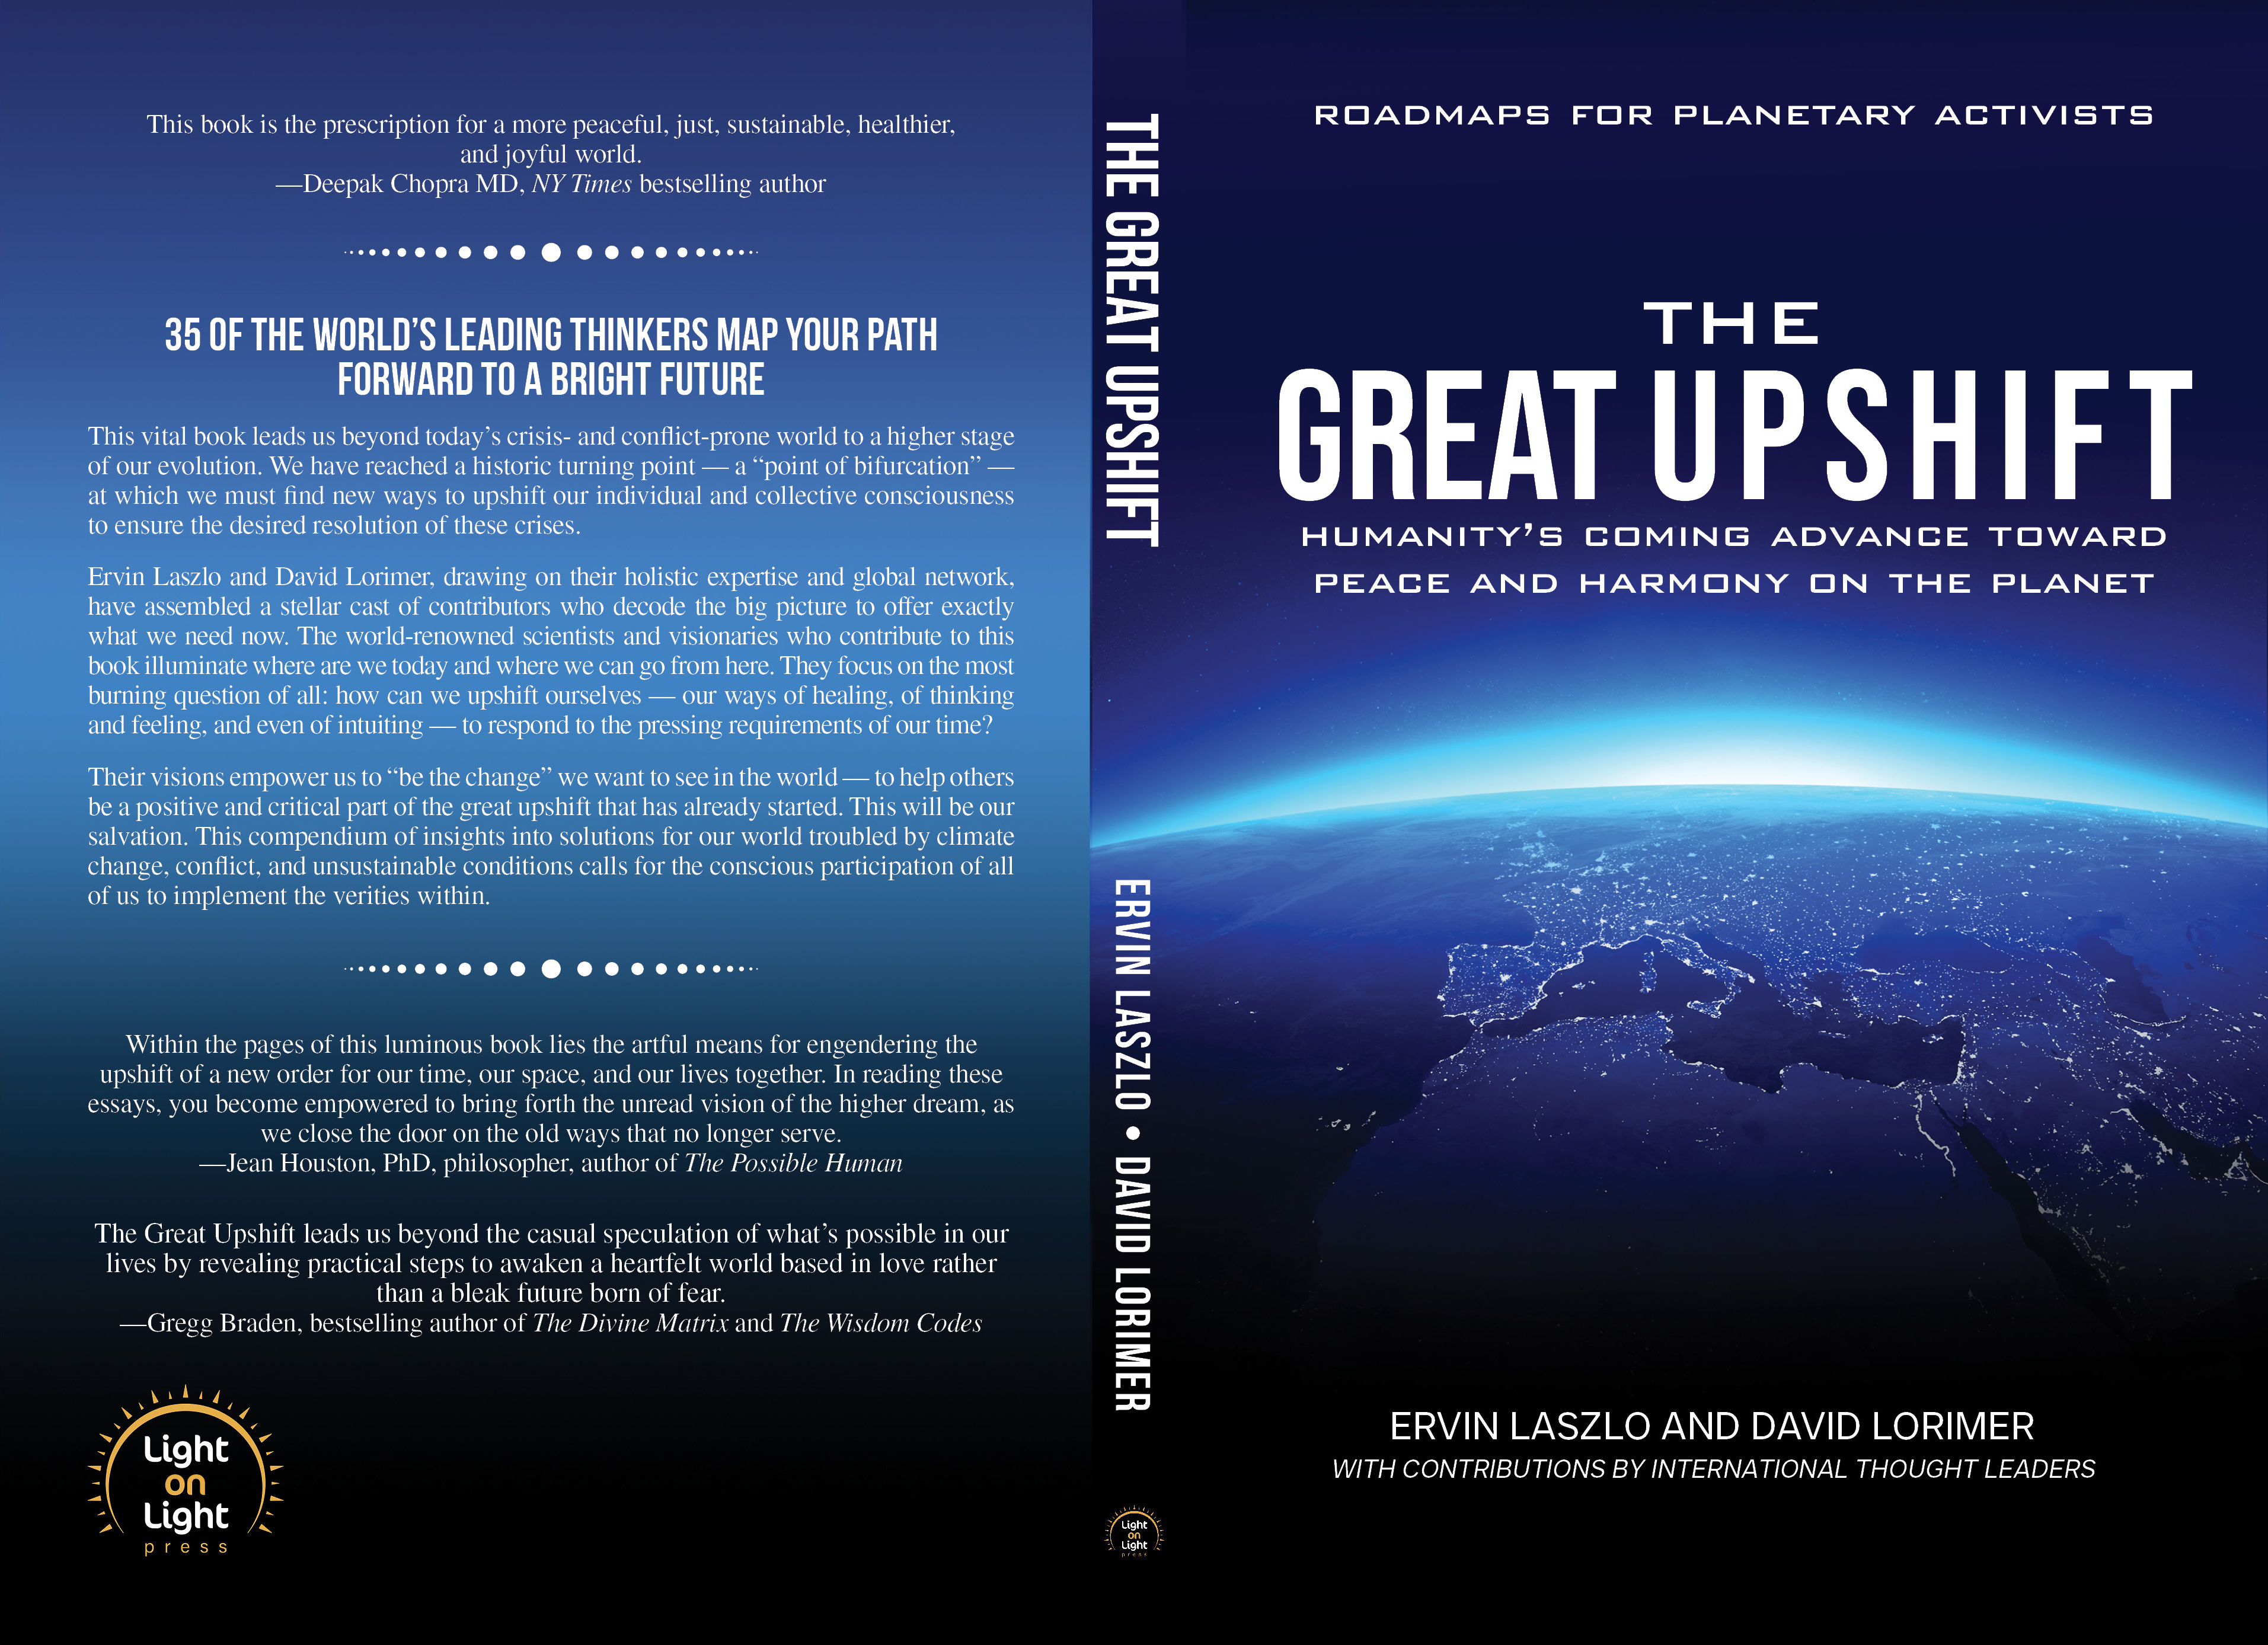 The Great Upshift'